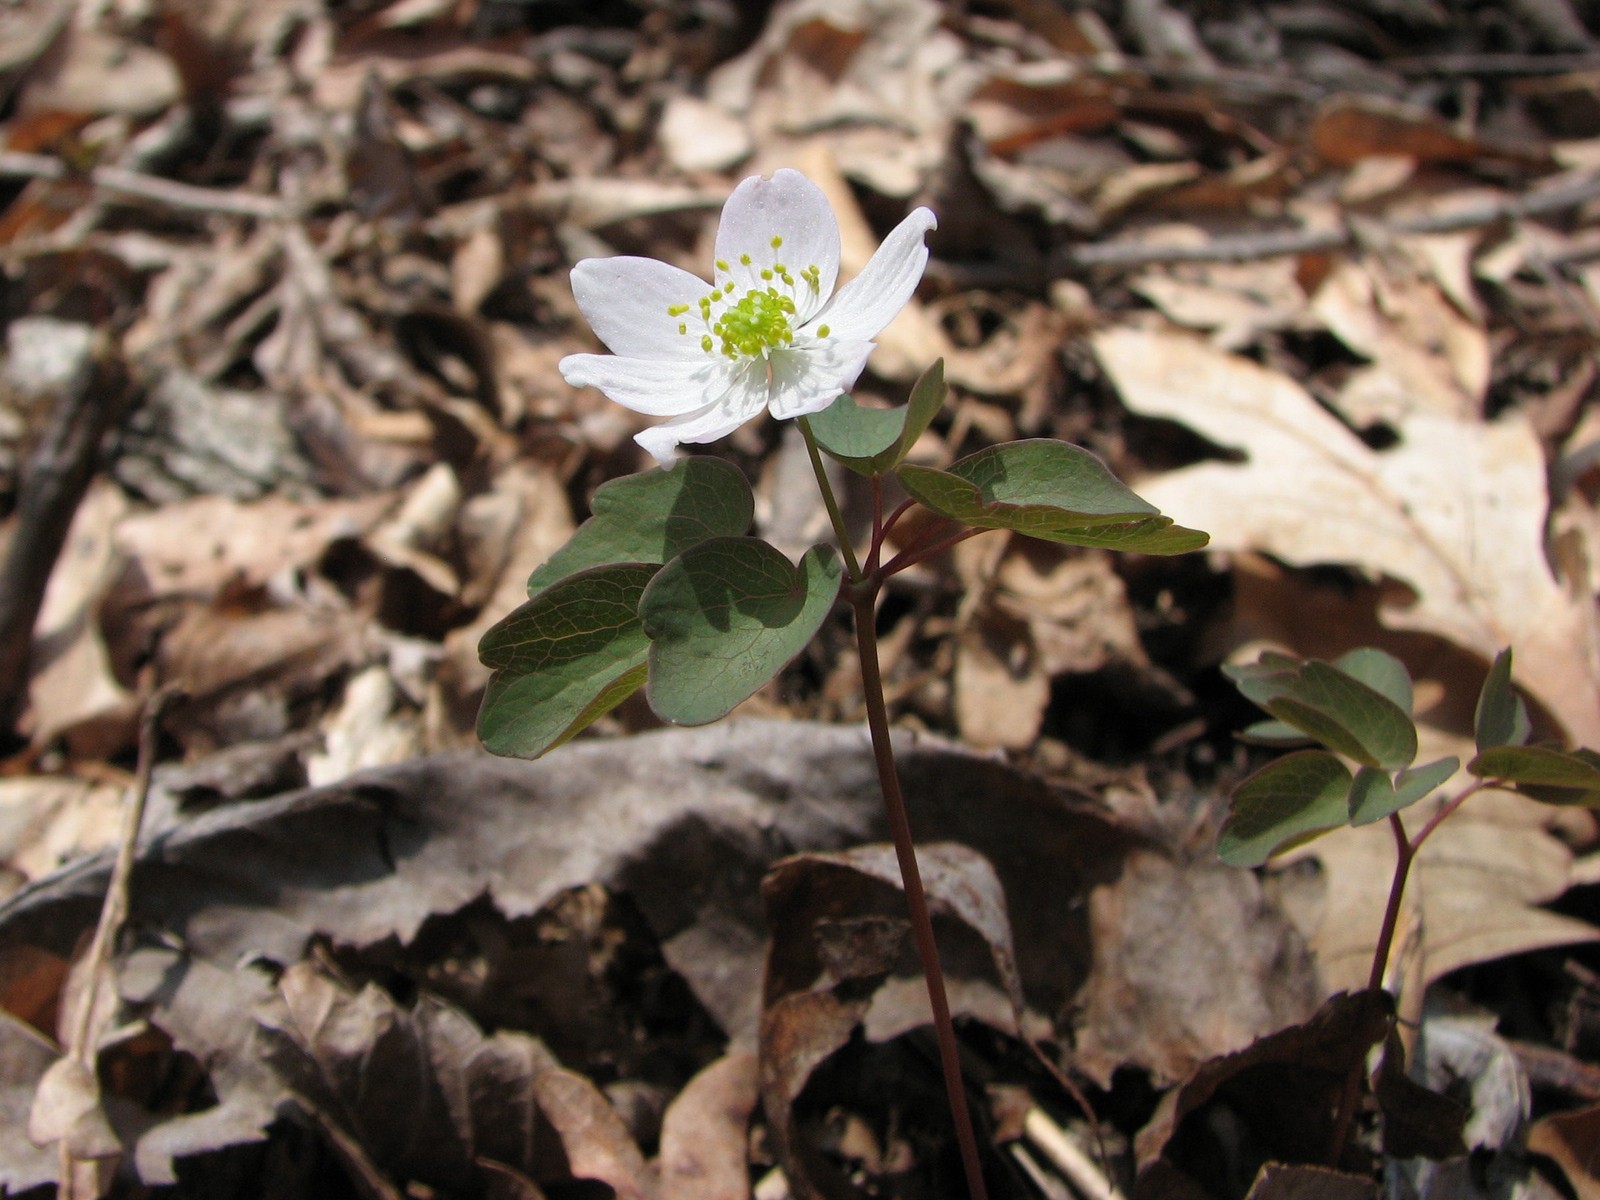 20090424134115 Rue-Anemone (Thalictrum thalictroides) - Oakland Co.JPG